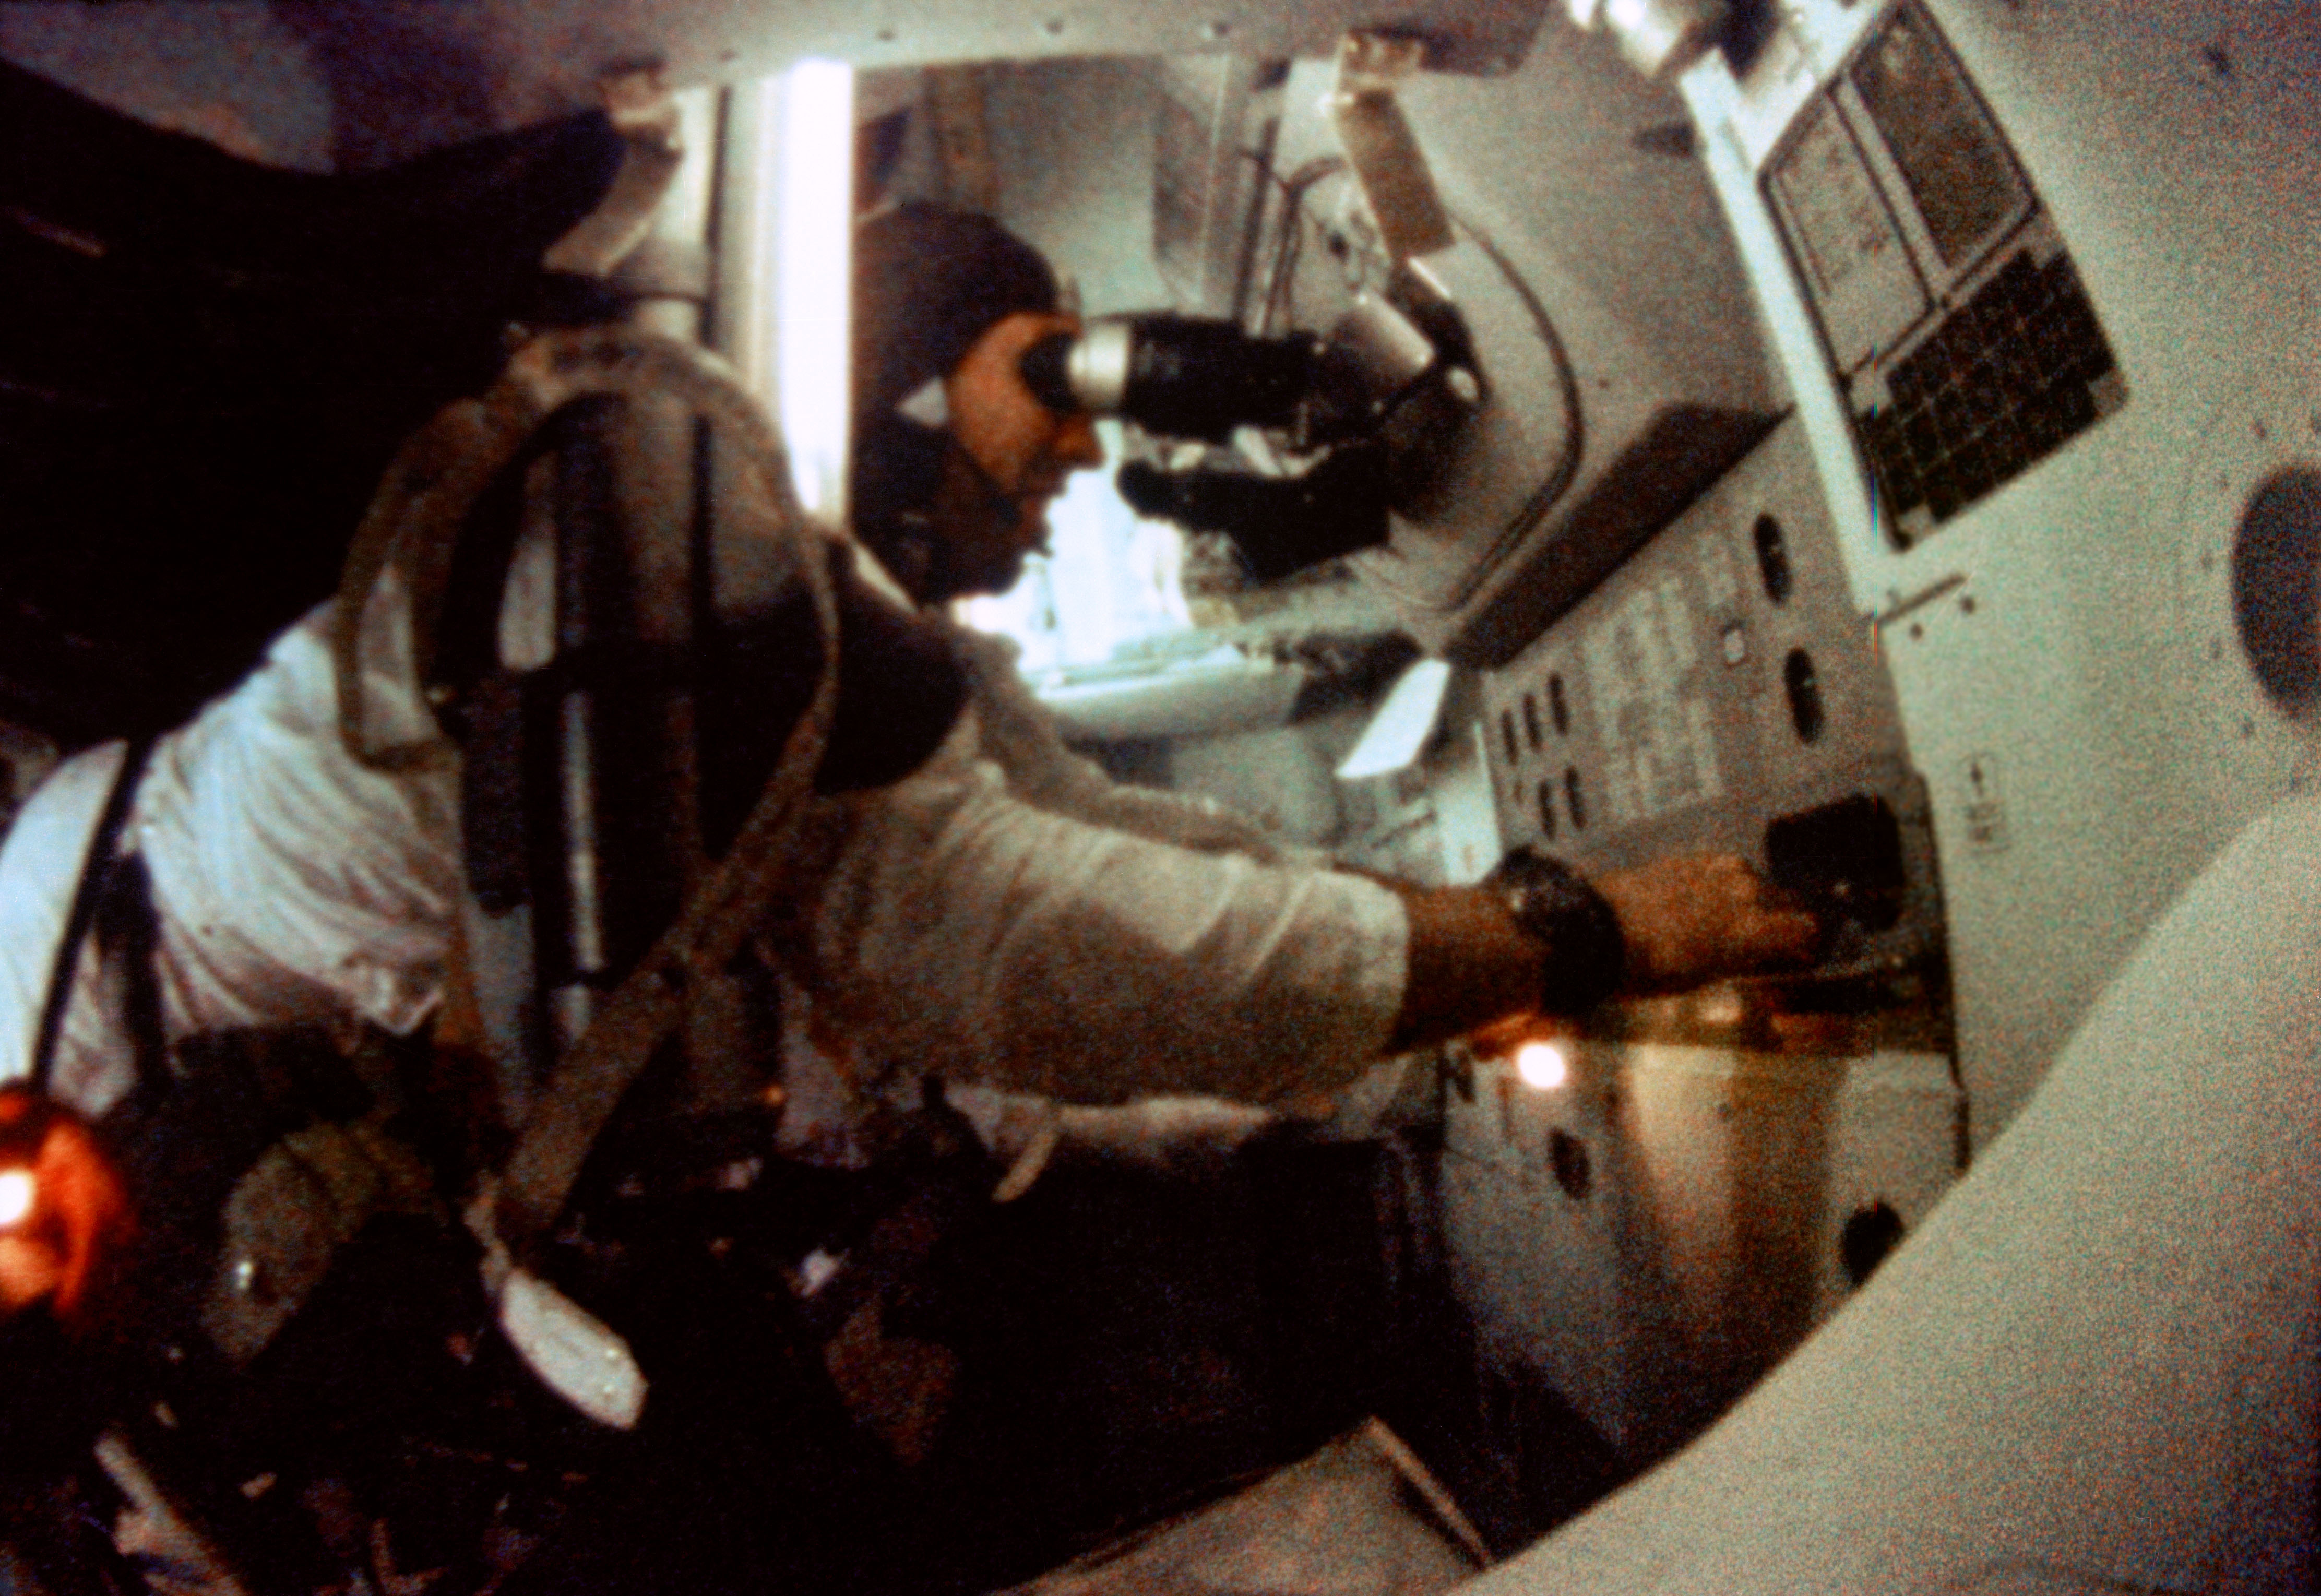 As the mission's senior pilot, one of Jim Lovell's responsibilities was taking star sightings and navigational measurements using the sextant and telescope. He is pictured at work in the command module's lower equipment bay. Photo Credit: NASA